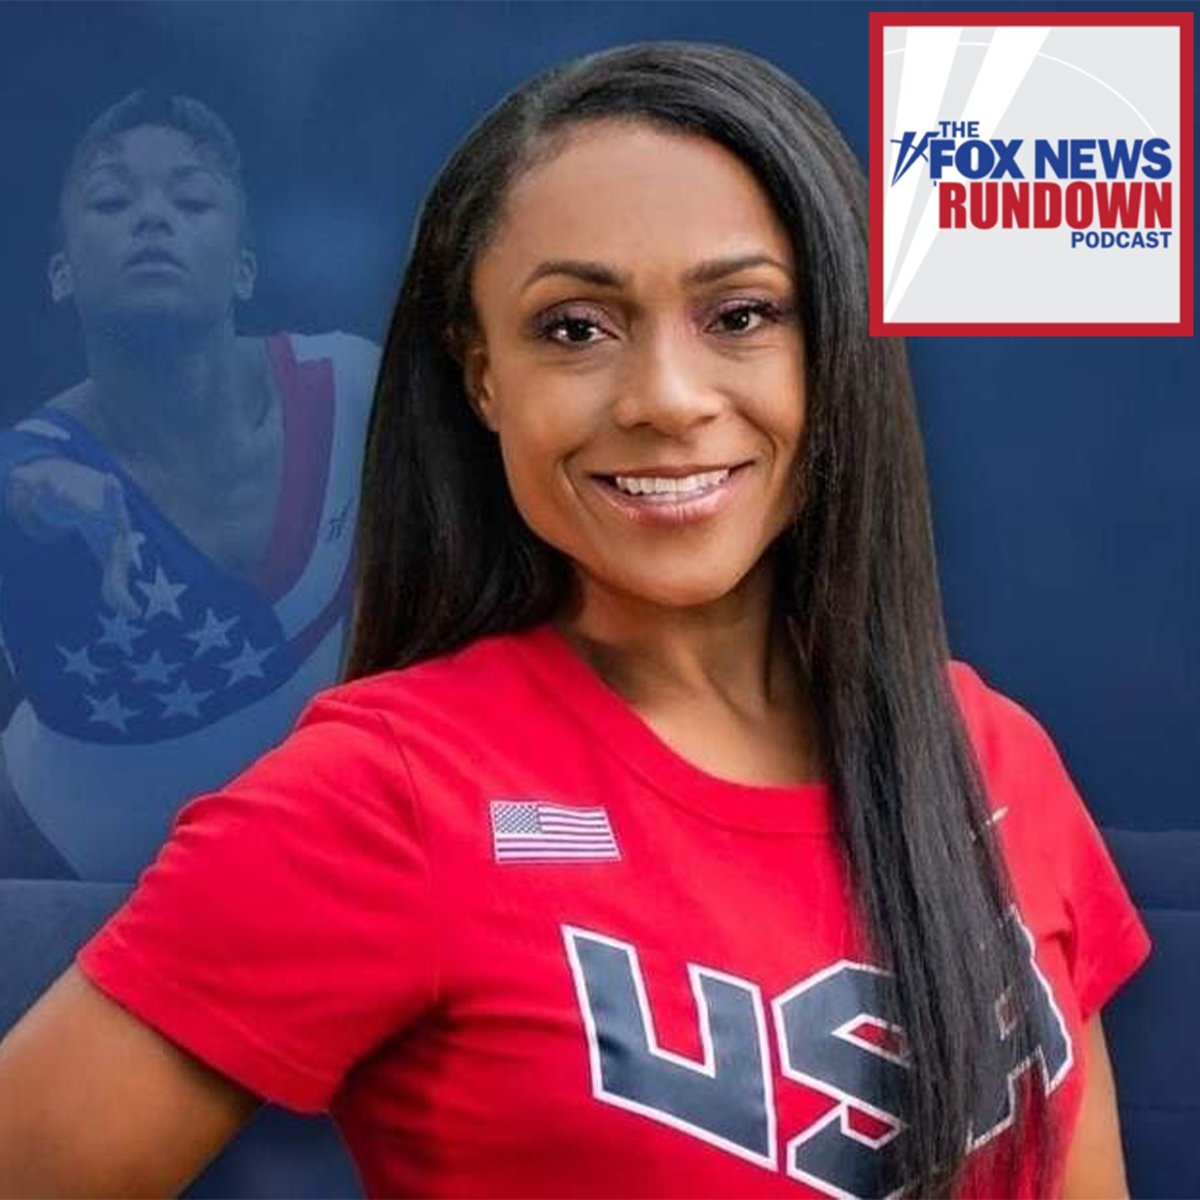 Does USA Gymnastics needs a cultural change? @dominiquedawes discusses @Simone_Biles, the pressure of being an Olympian, and how she's trying to help young athletes. #FOXNewsRundown #podcast ow.ly/btkW50FHfkC